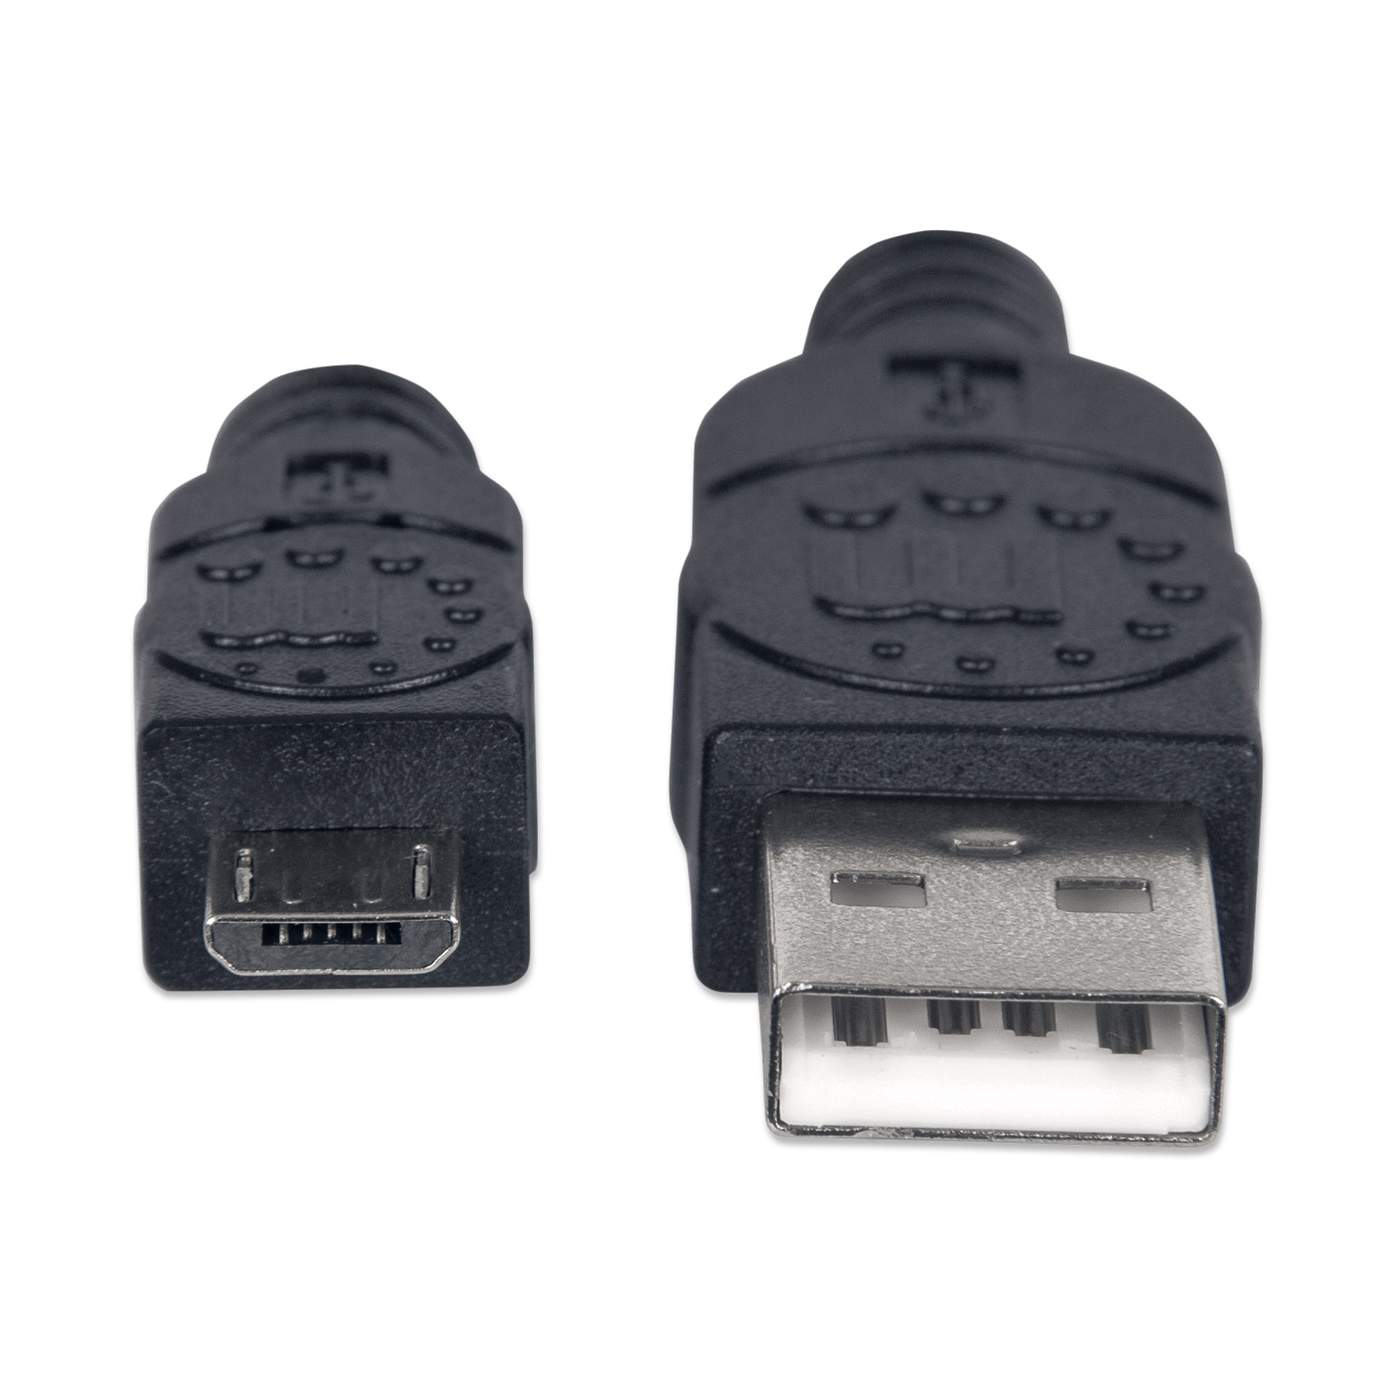 Hi-Speed USB Micro-B Device Cable Image 4